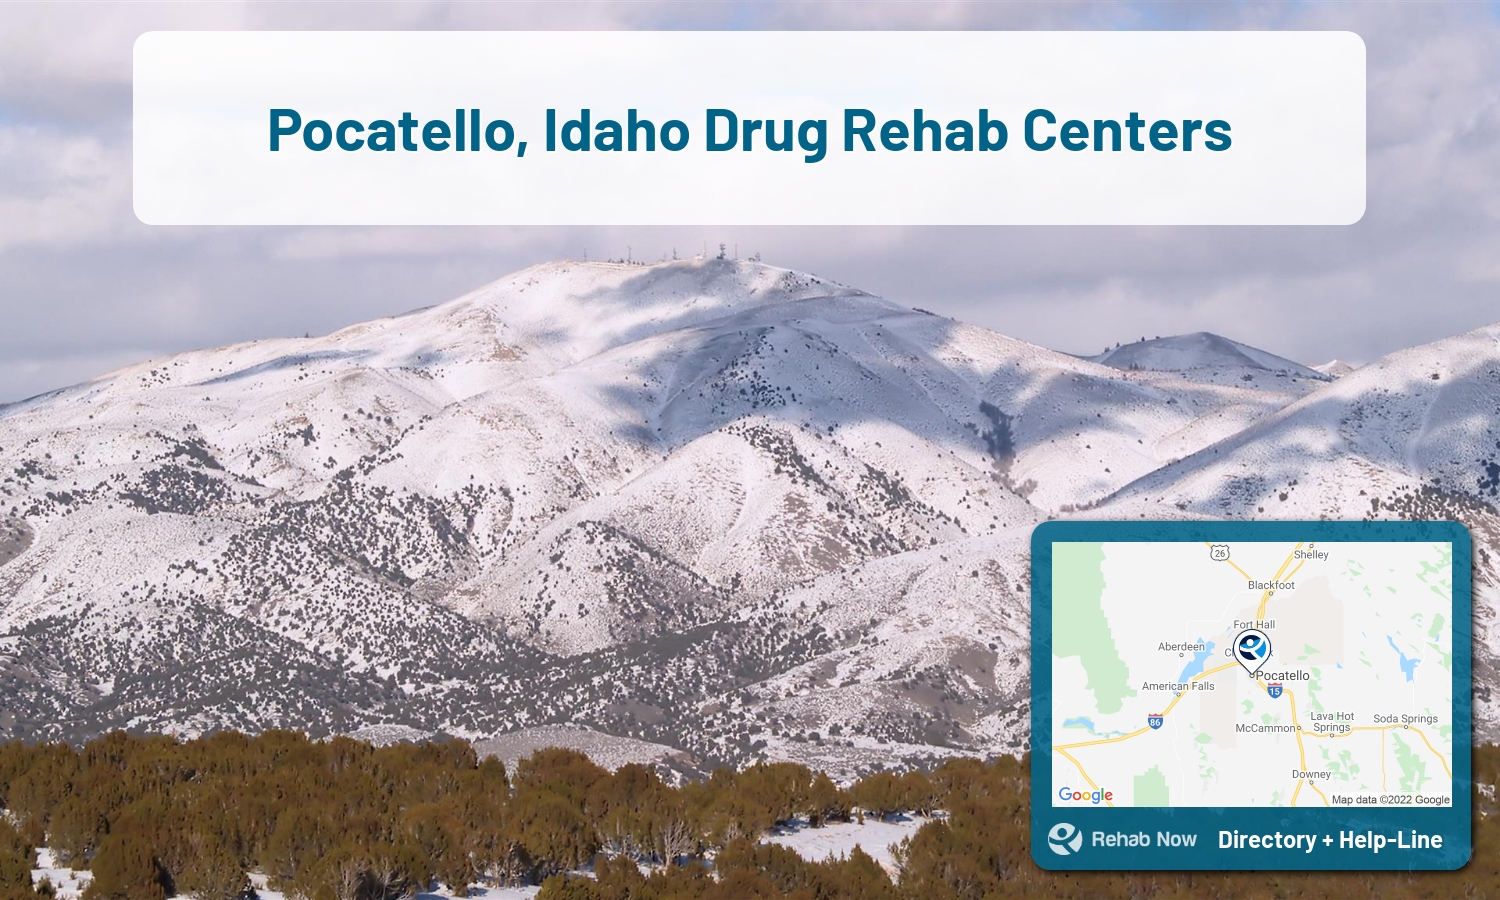 View options, availability, treatment methods, and more, for drug rehab and alcohol treatment in Pocatello, Idaho